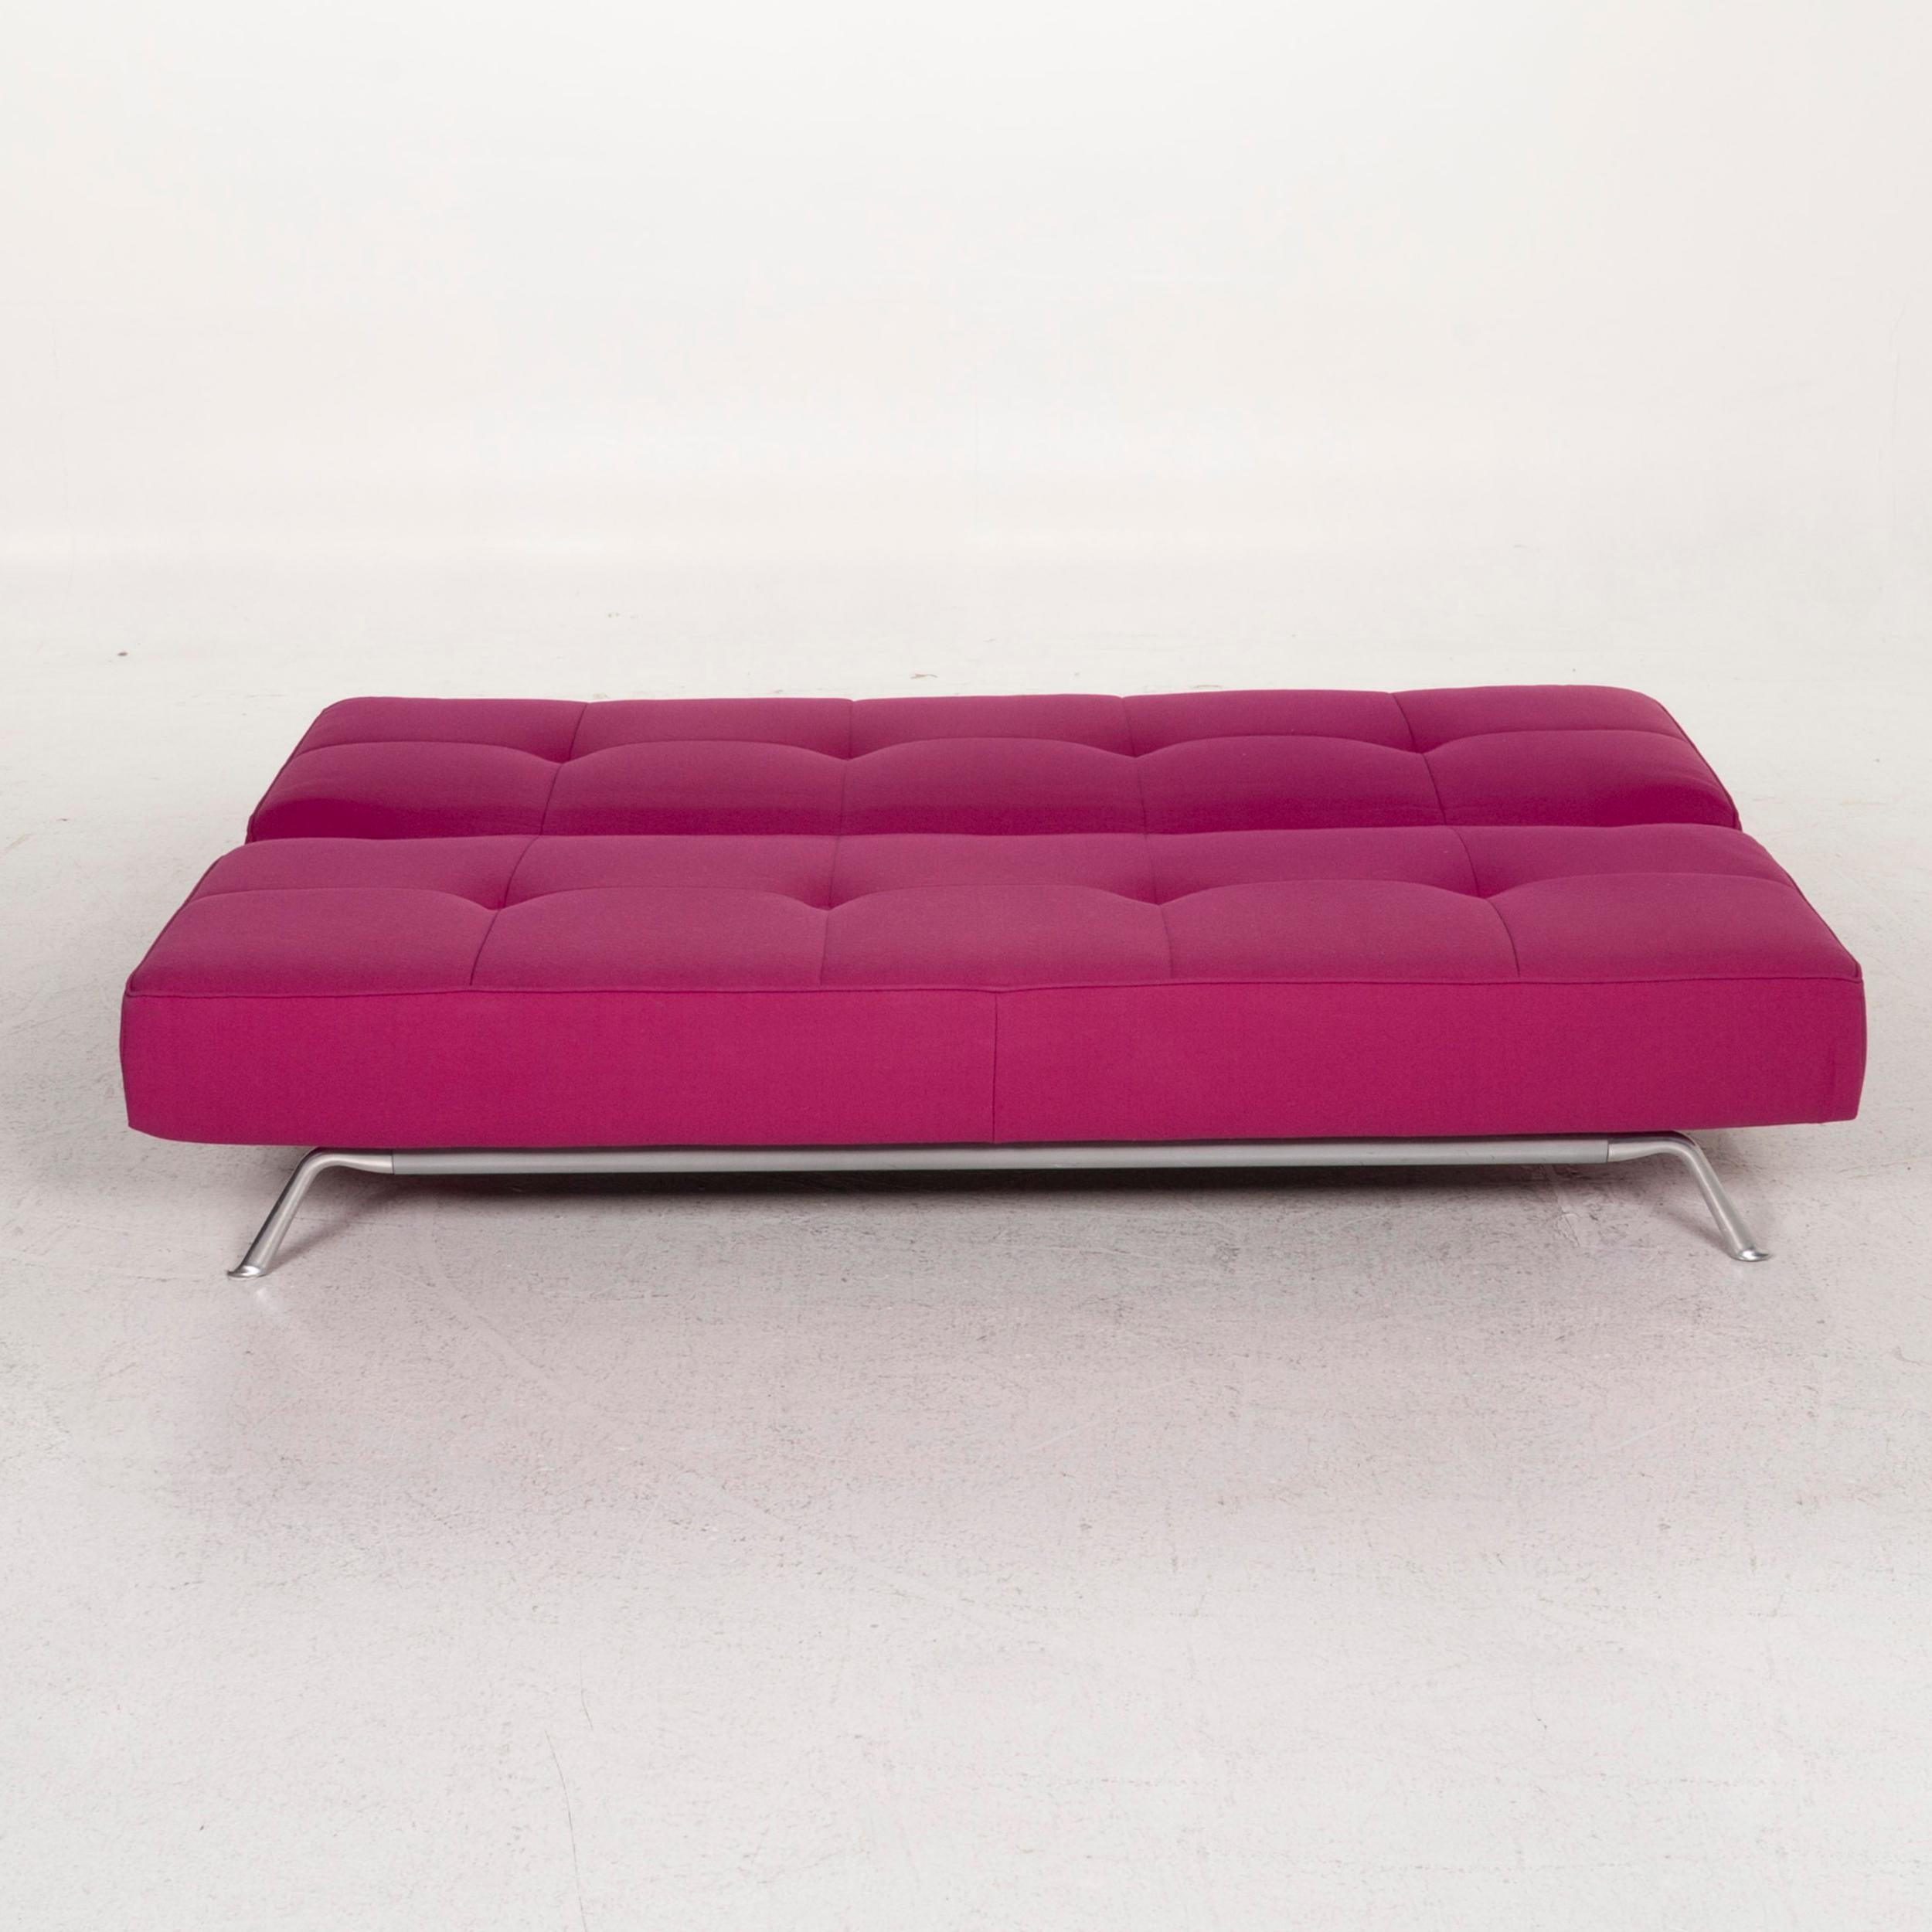 We bring to you a ligne roset Smala fabric sofa pink three-seat sofa bed function sleep.



 Product measurements in centimeters:
 

Depth 107
Width 201
Height 90
Seat-height 41
Seat-depth 58
Seat-width 201
Back-height 49.
  